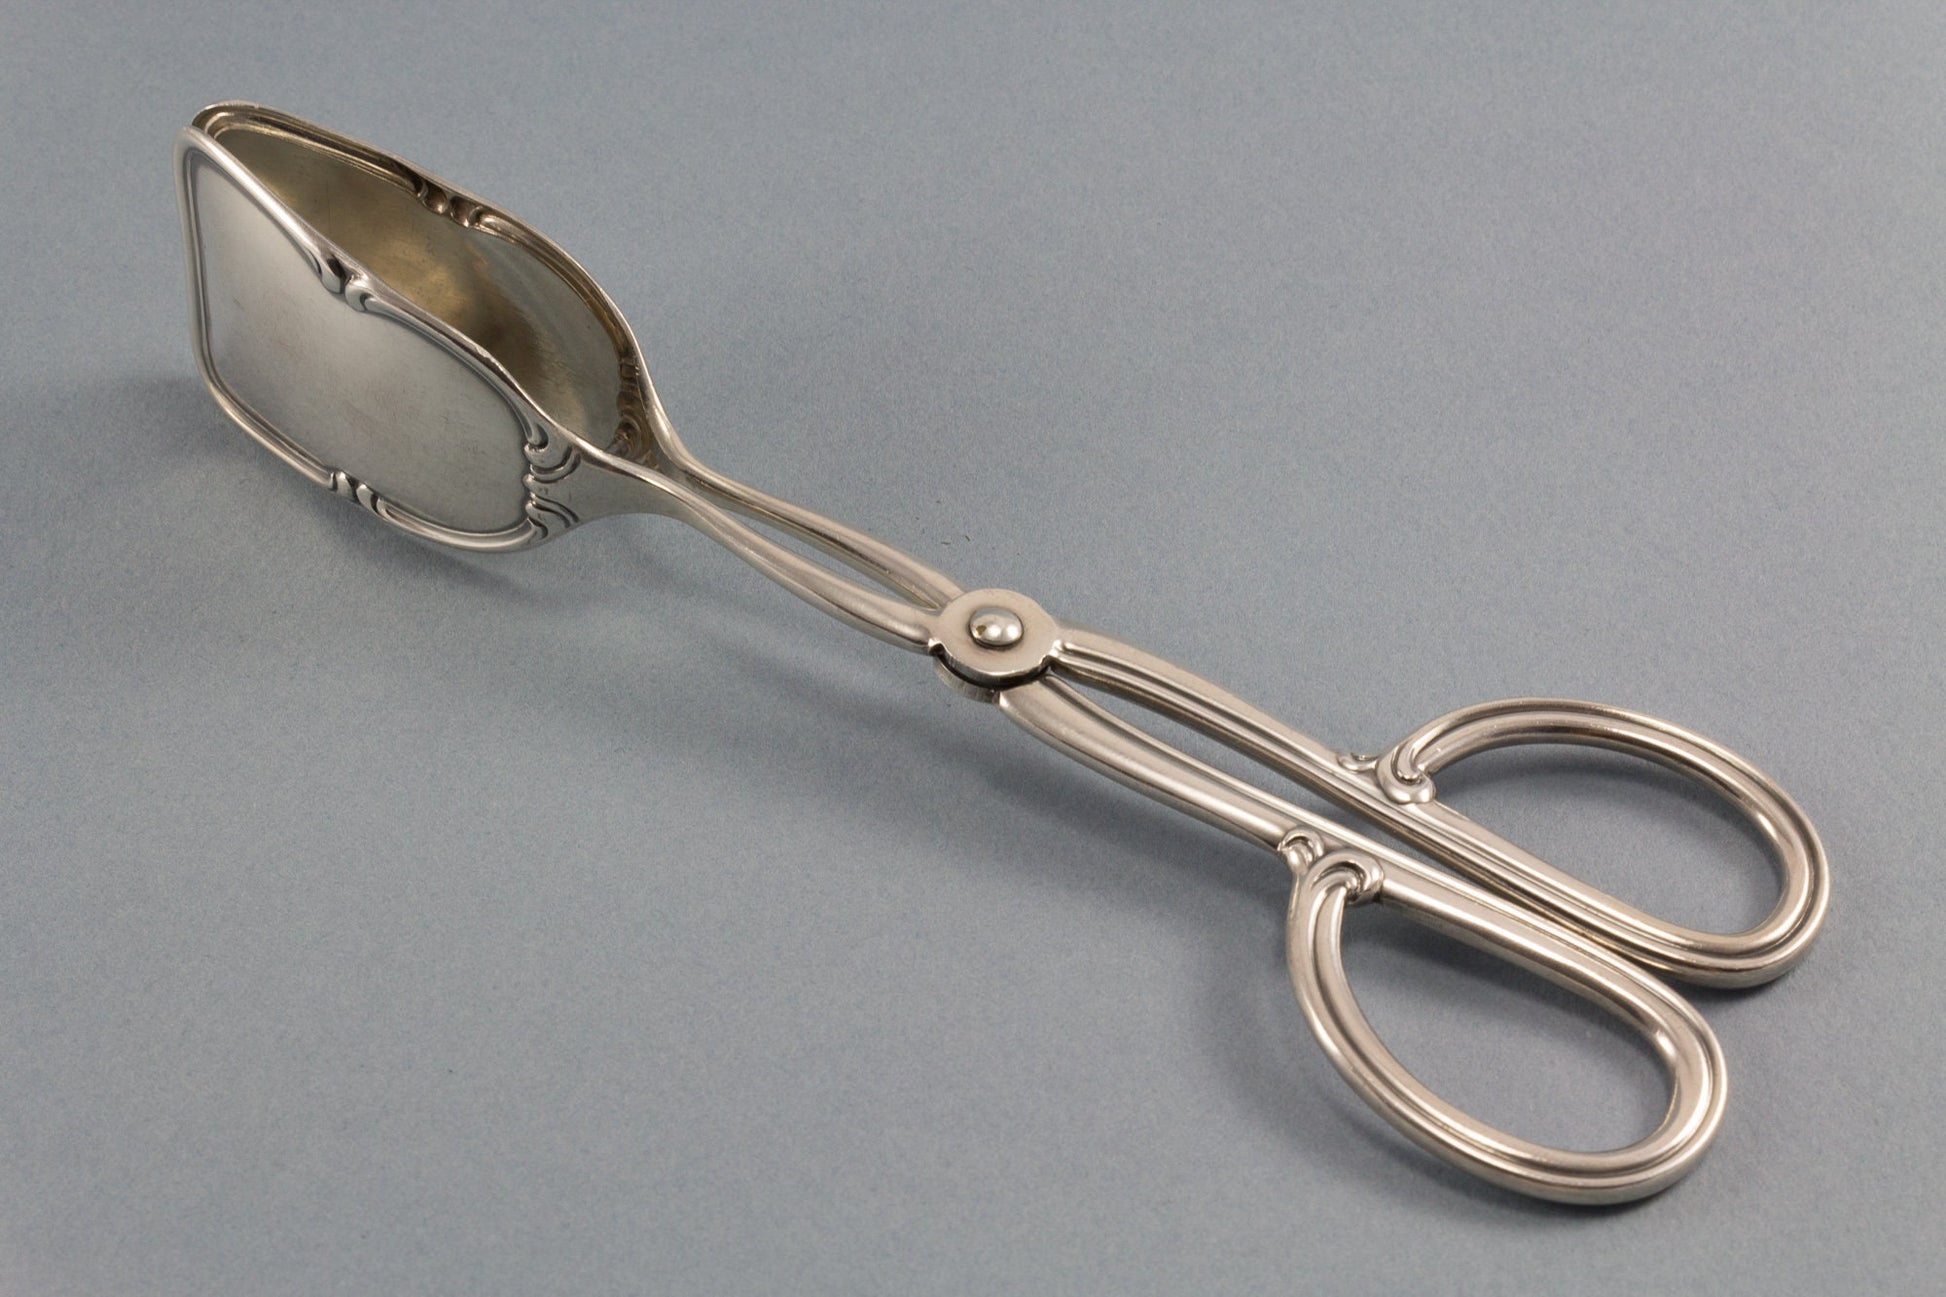 Silver-plated pastry pliers by WMF, vintage